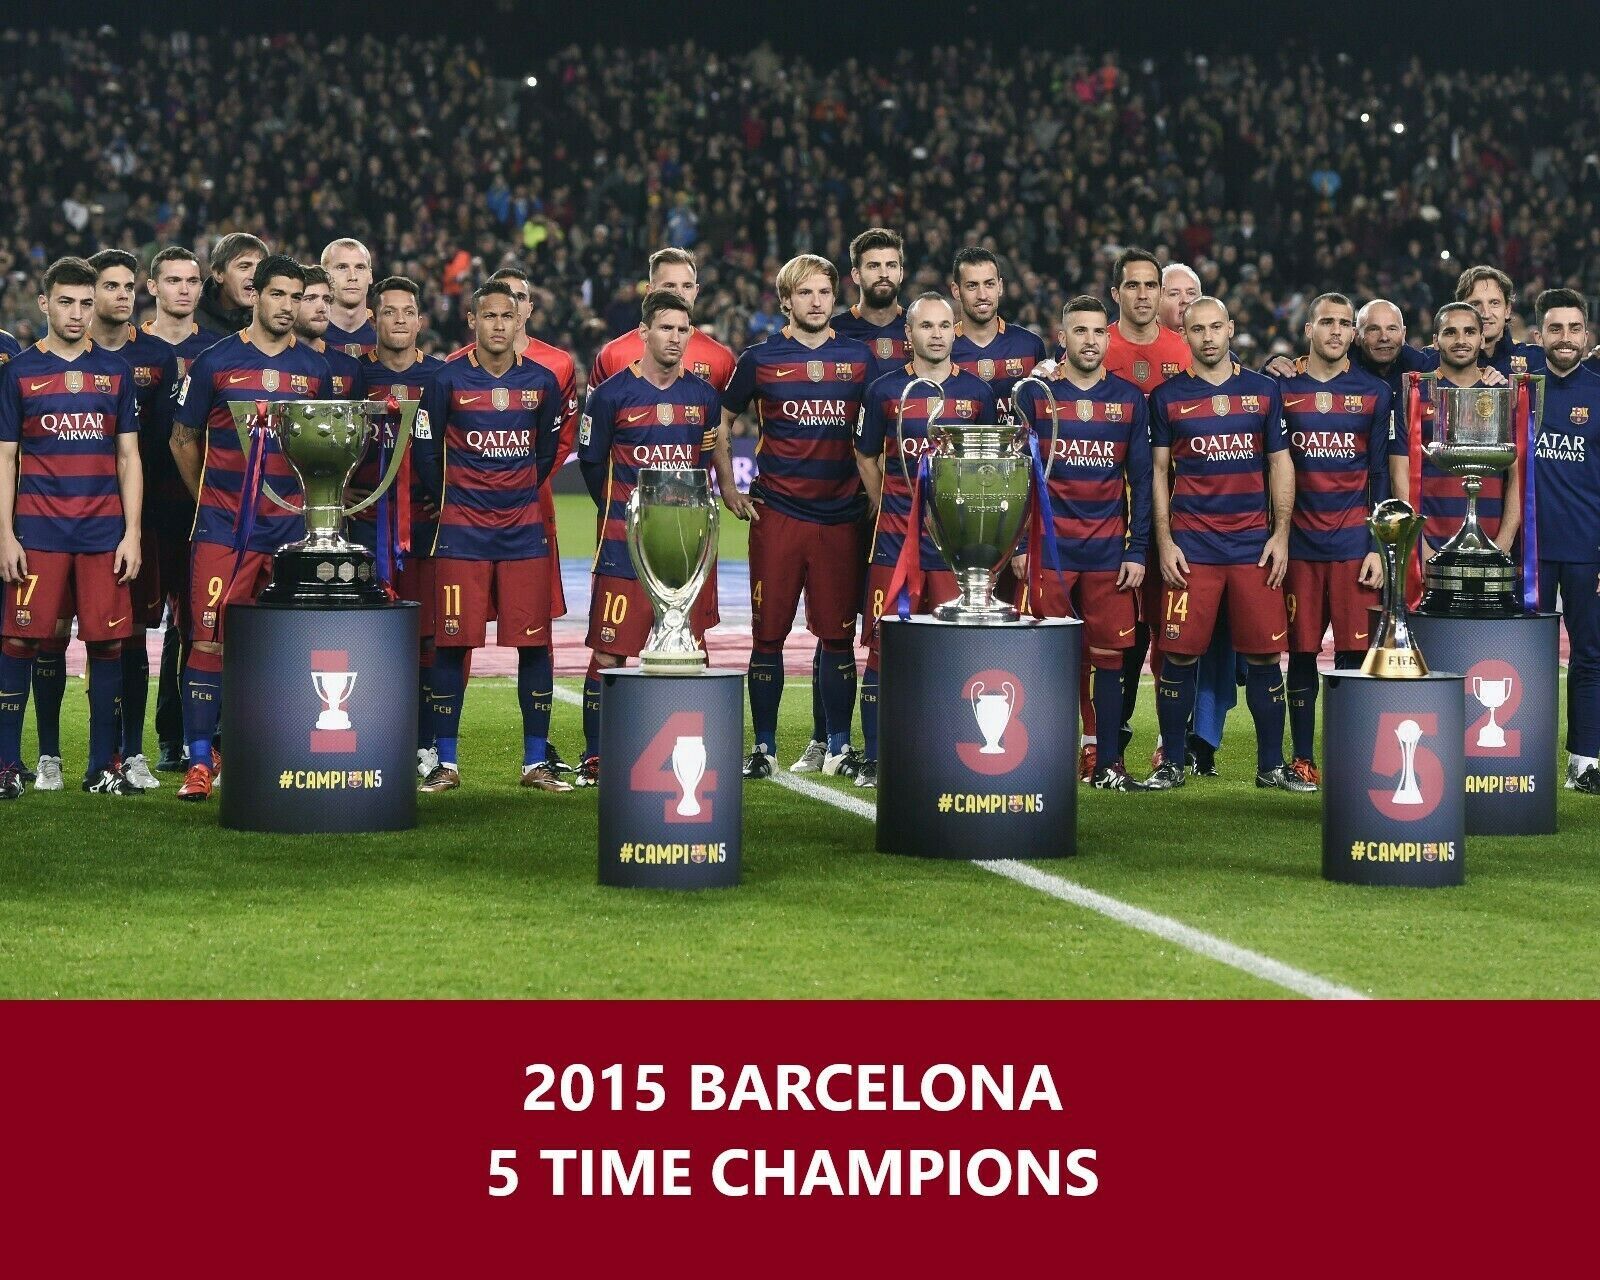 2015 BARCELONA 5 TIME CHAMPIONS 8X10 TEAM PHOTO BC SOCCER FOOTBALL PICTURE - $4.94